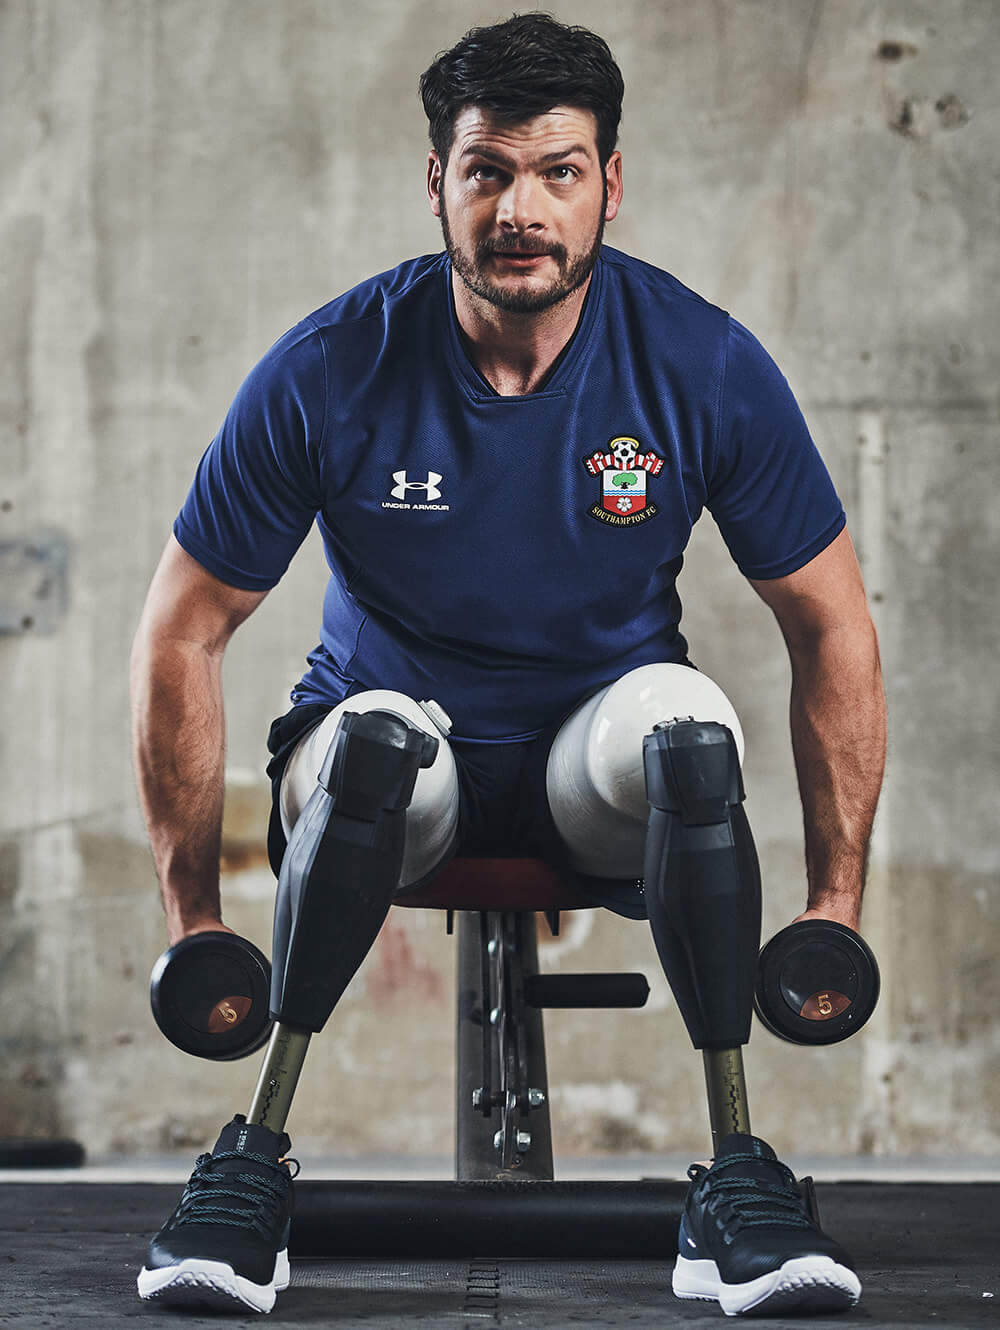 paralympian athlete excersising with dumbells, wearing a blue southampton fc tee shirt